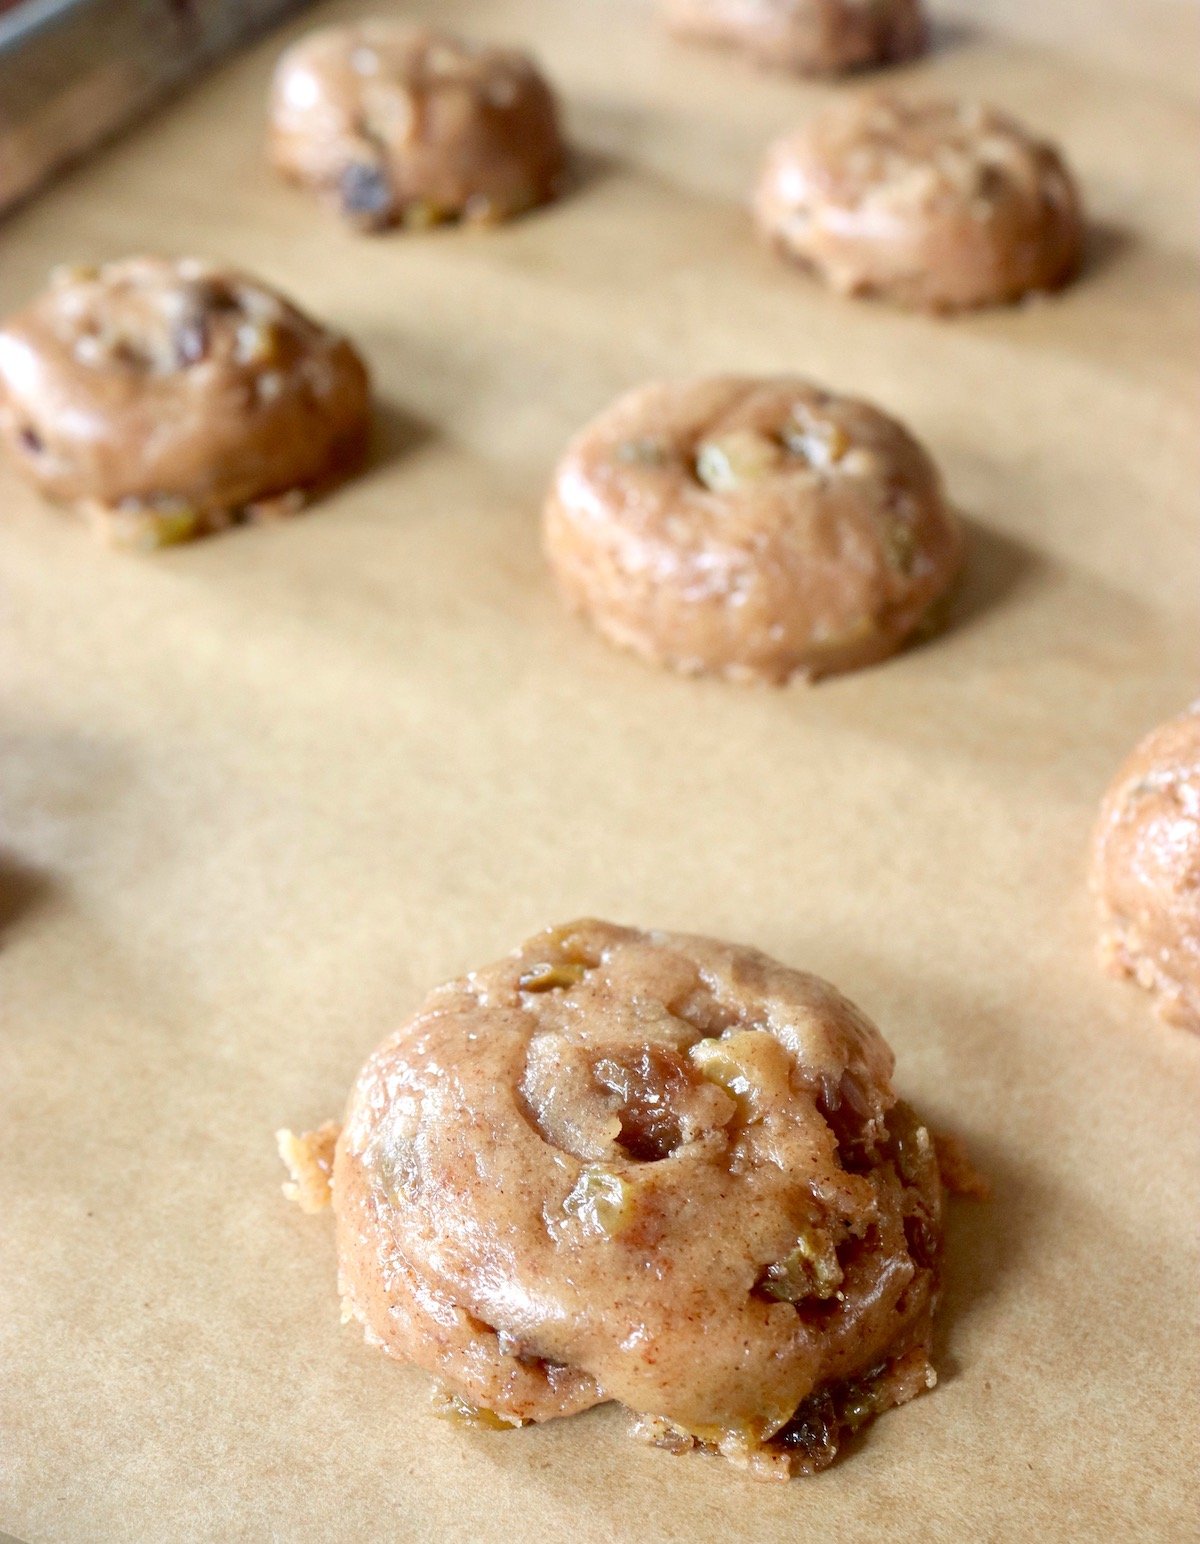 A few round balls of cookie dough with raisins that have been gently flattened, on parchment paper.